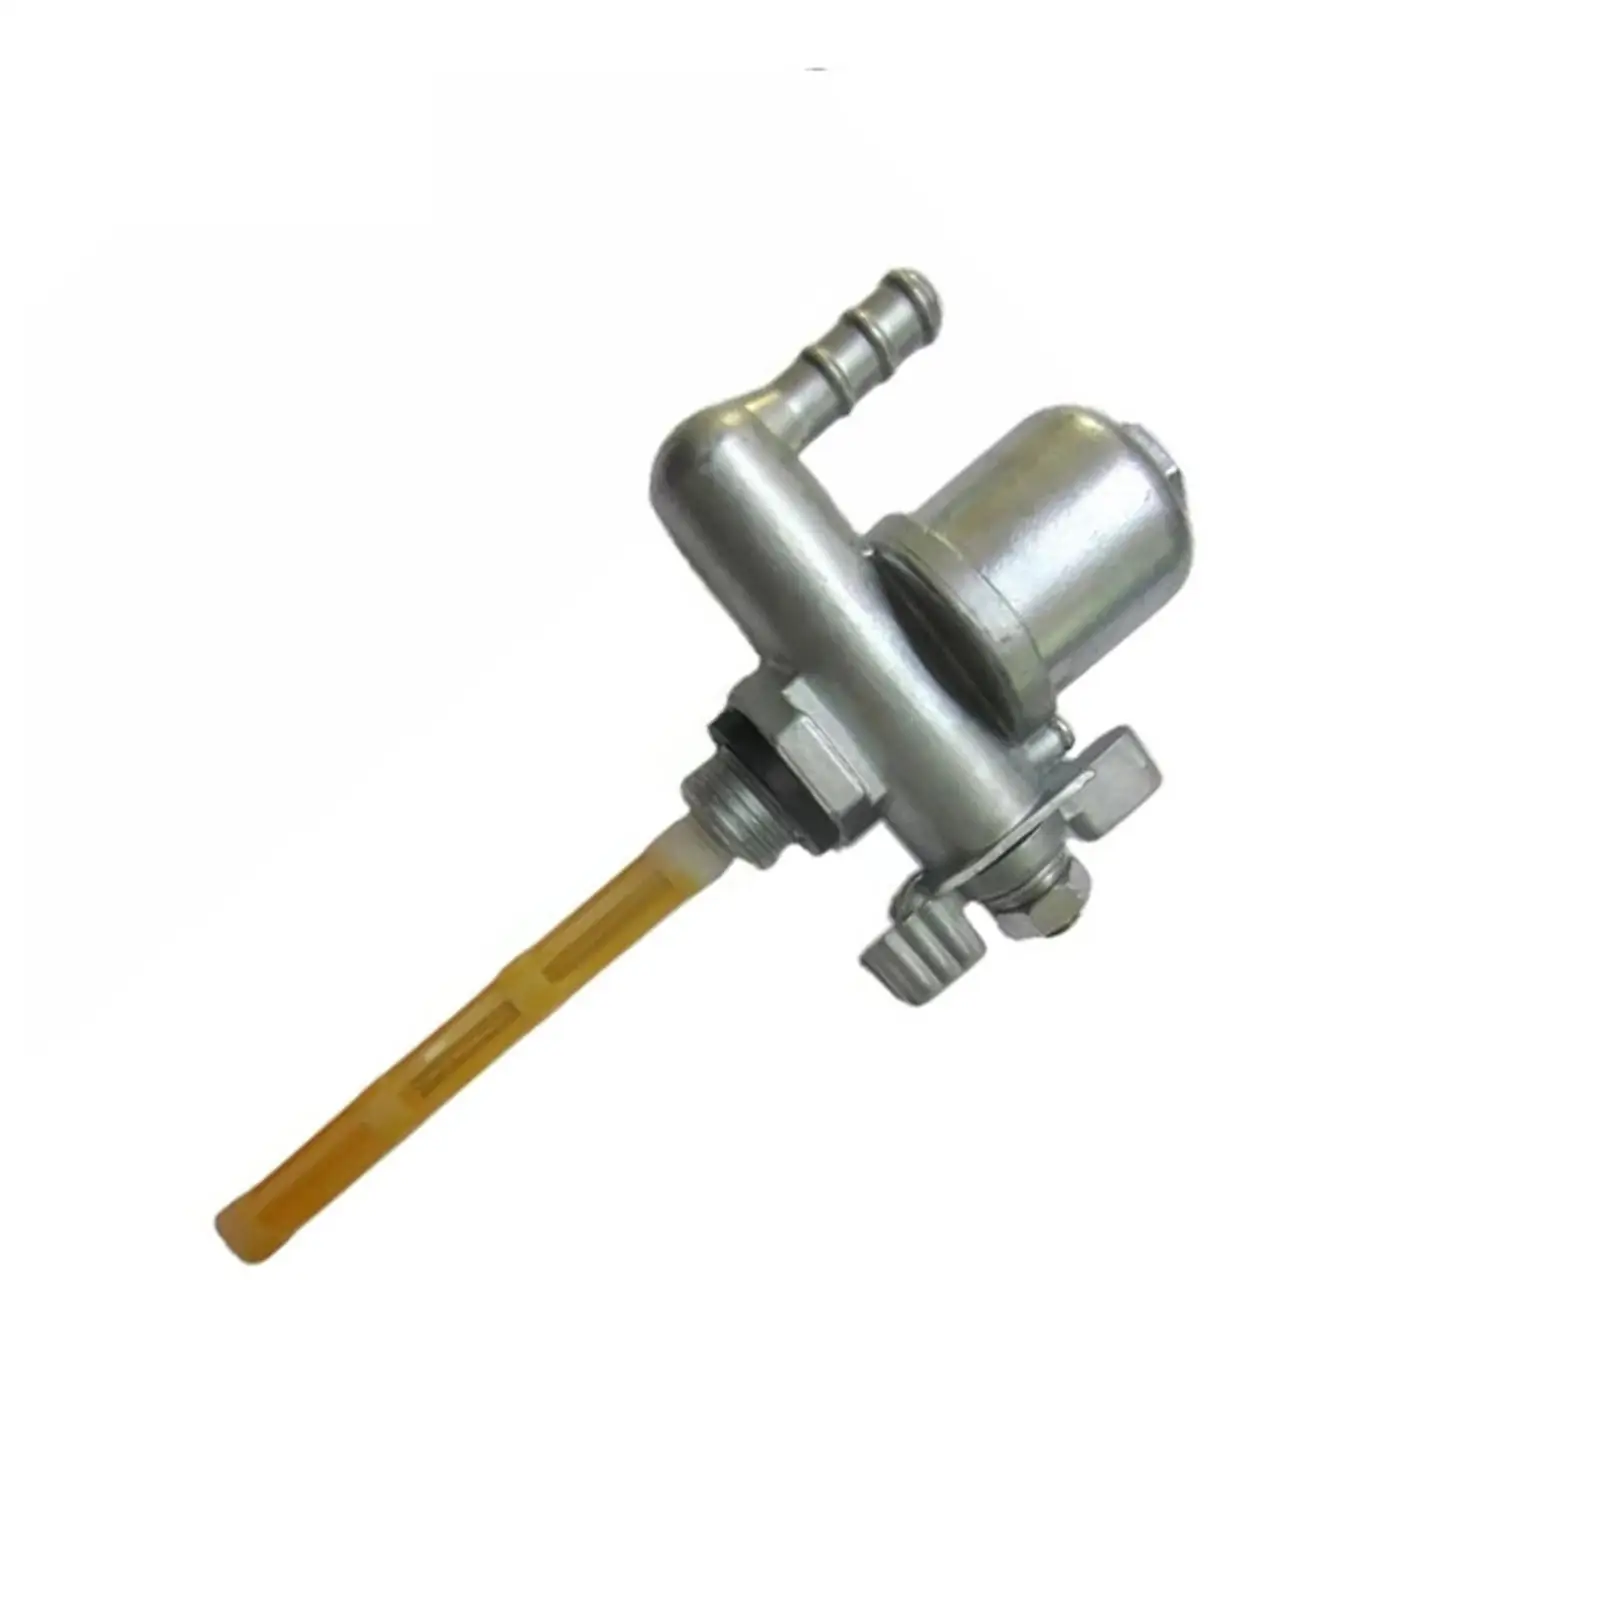 Motorcycle Fuel Gas Petcock Valve Switch Replacement for Ruassia Msk Motorcycle Parts Supplies Durable Premium